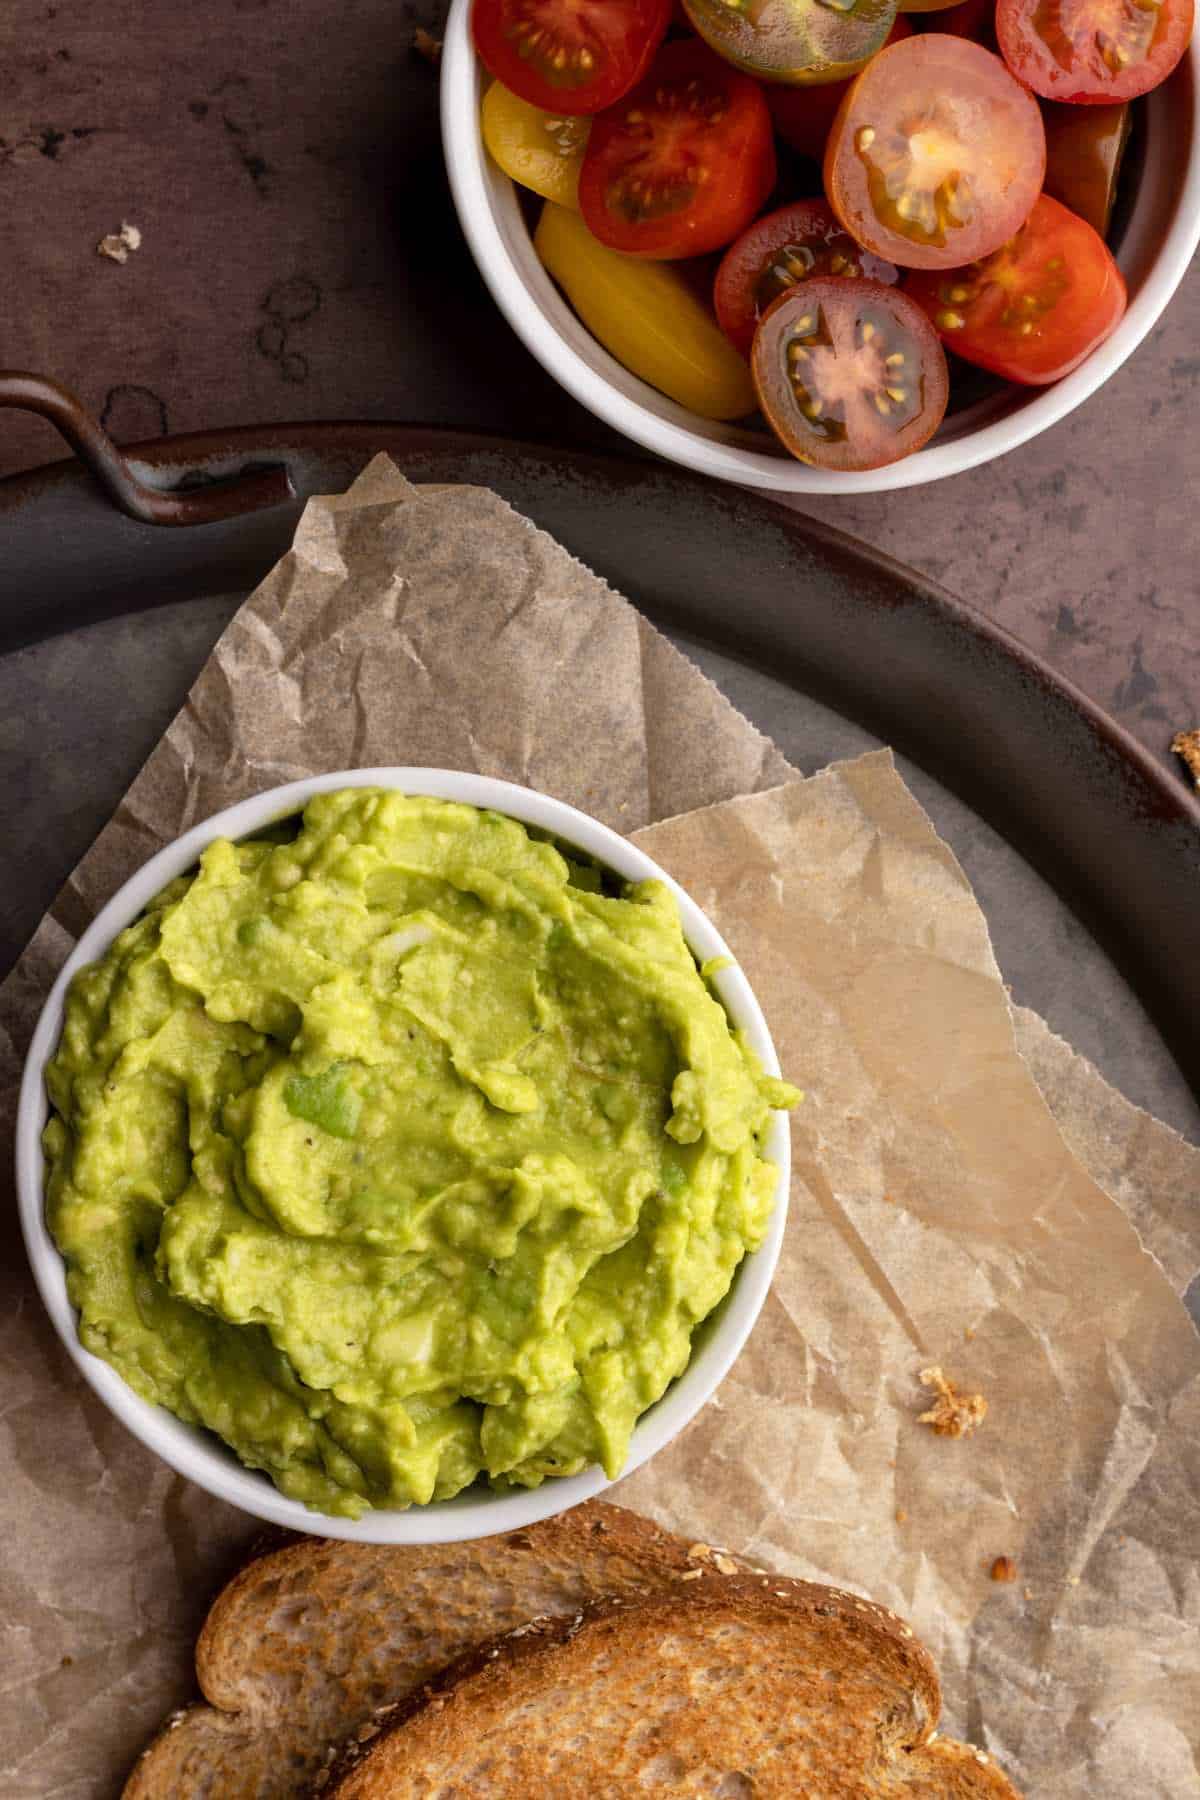 Mashed avocado in a small bowl.